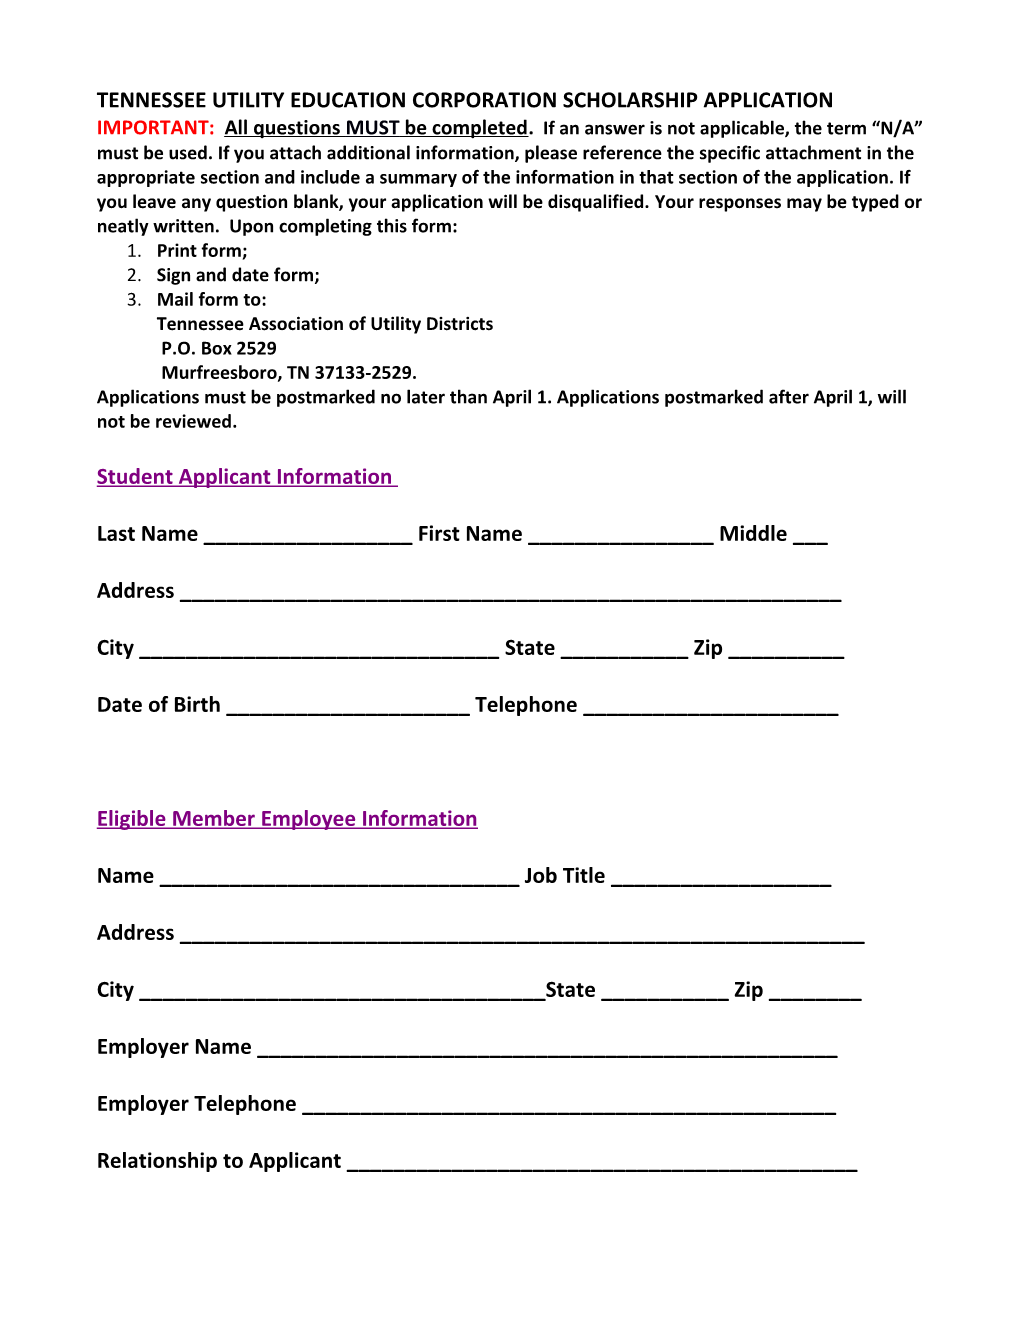 Tennessee Utility Education Corporation Scholarship Application